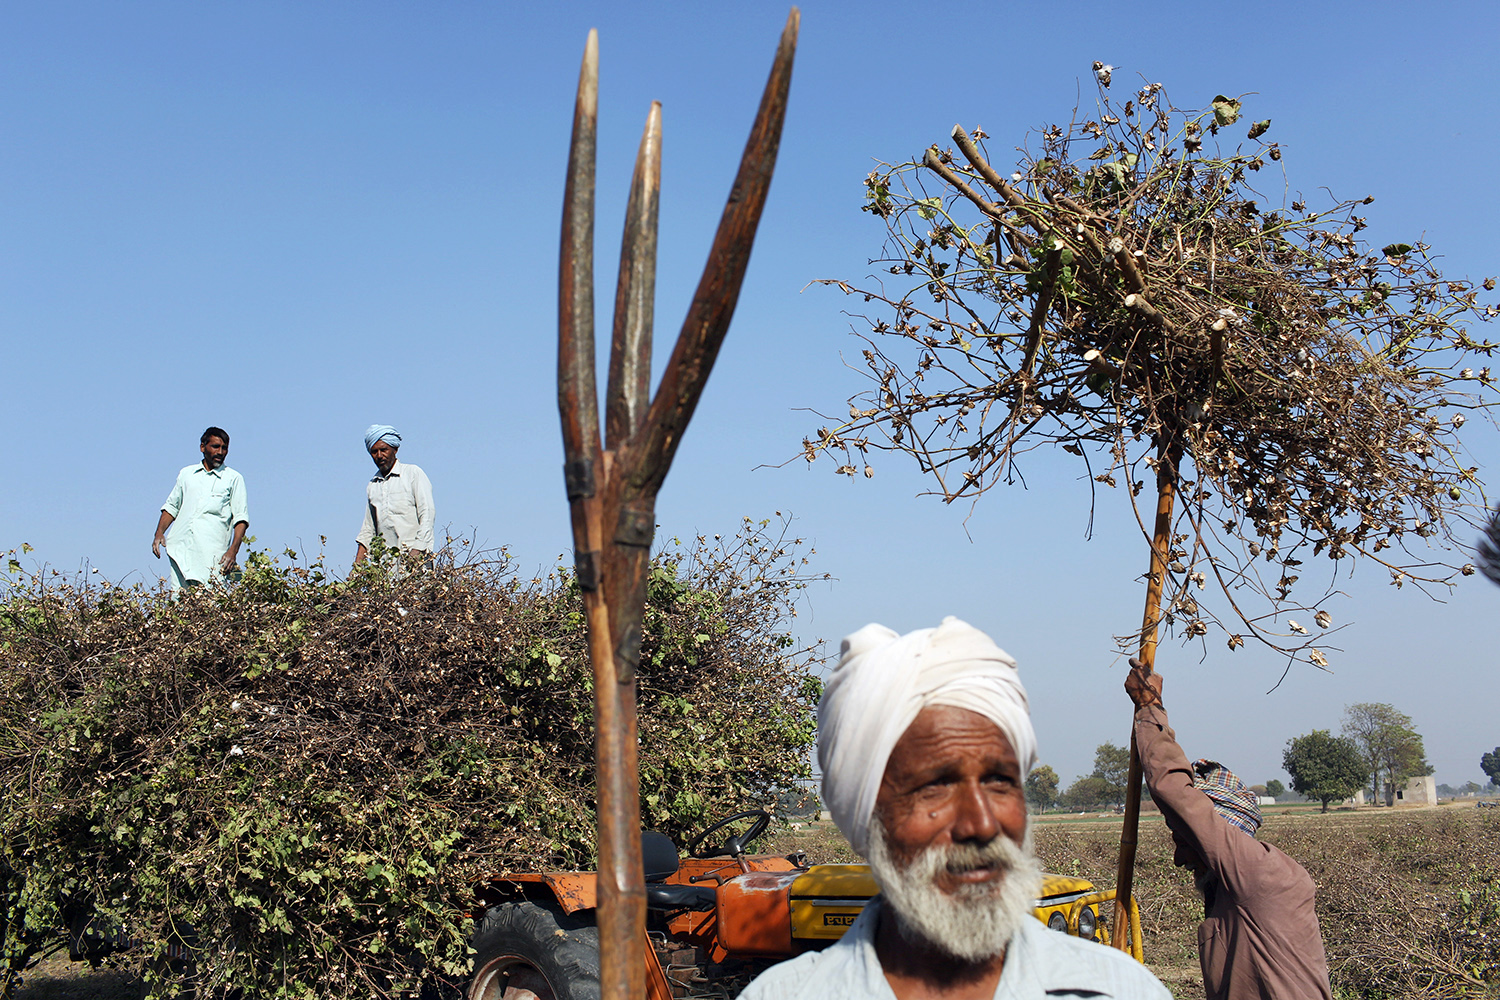 Farmers harvesting cotton in the Malwa region of Punjab. The area is one of India’s most important cotton growing regions. More extensive use of pesticides and insecticides has helped increase crop yields; however, it has also led to severe health issues in local communities. Image by Sean Gallagher. India, 2013.